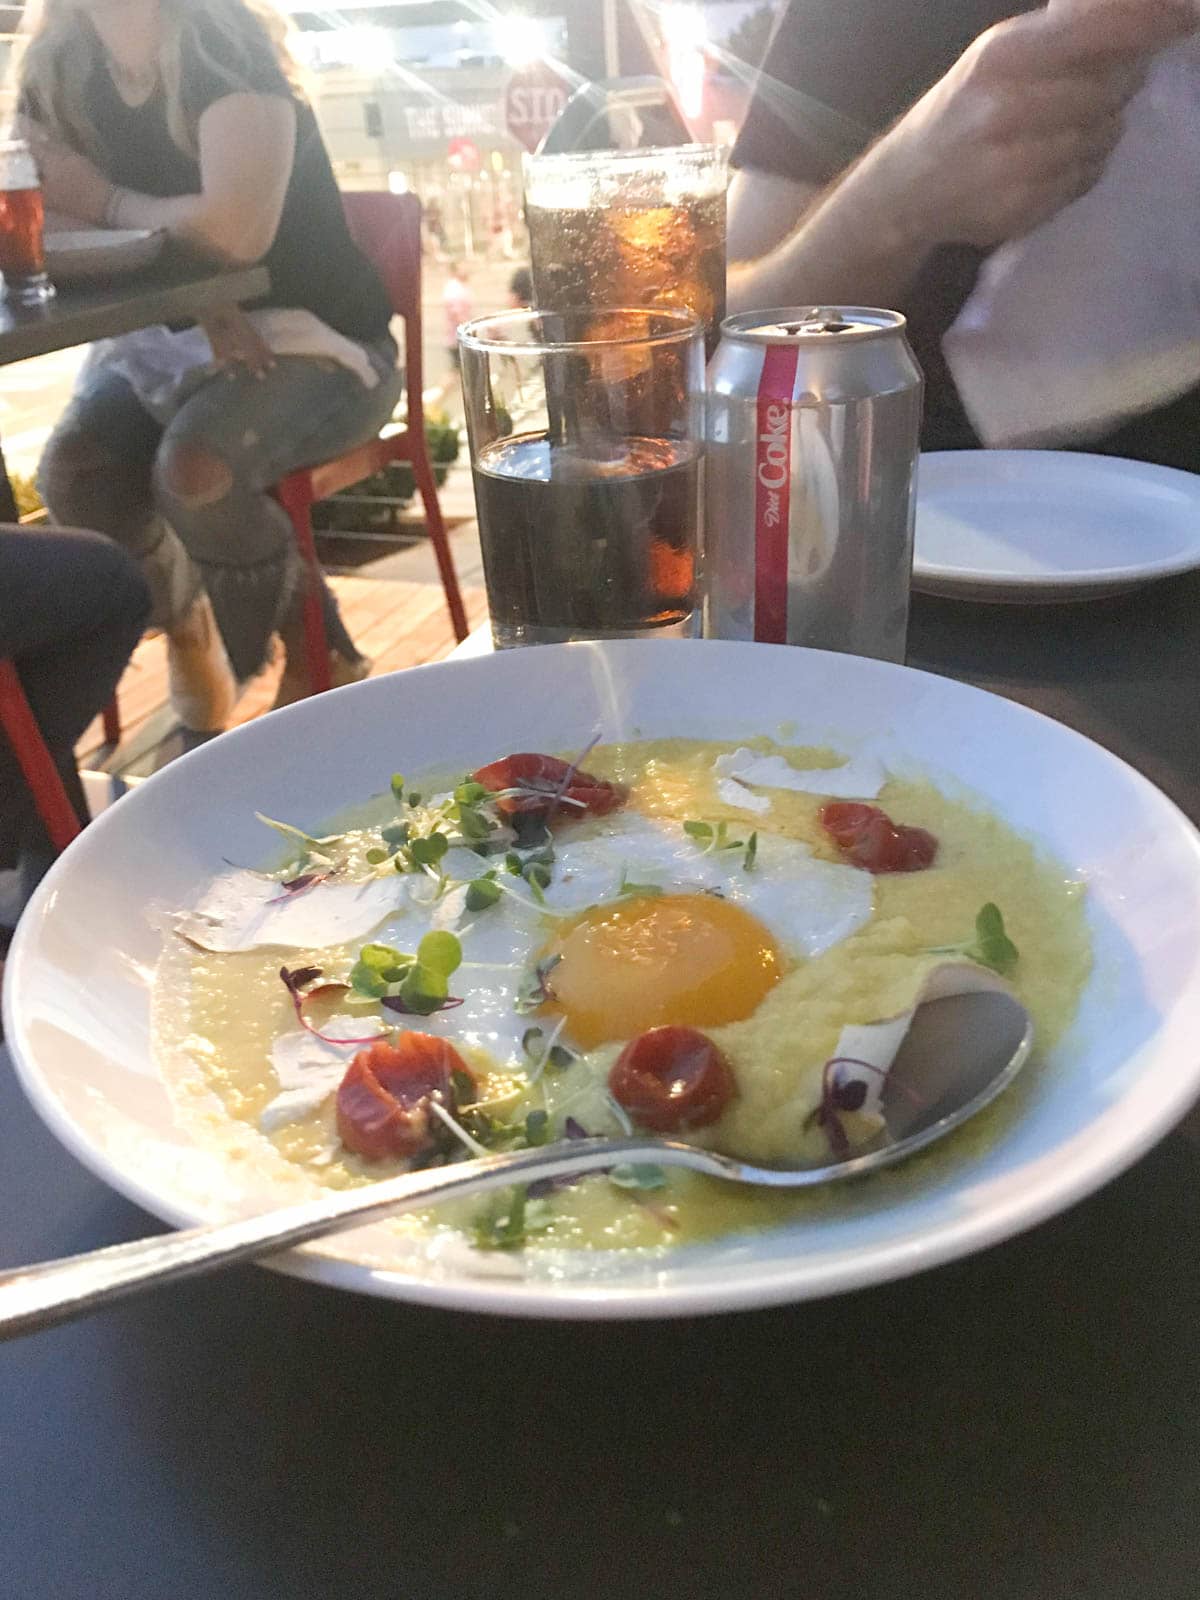 A white dish of polenta with tomatoes and an egg in the middle. Itâ€™s a dark evening setting and some Diet Coke can be seen in the background on the table.